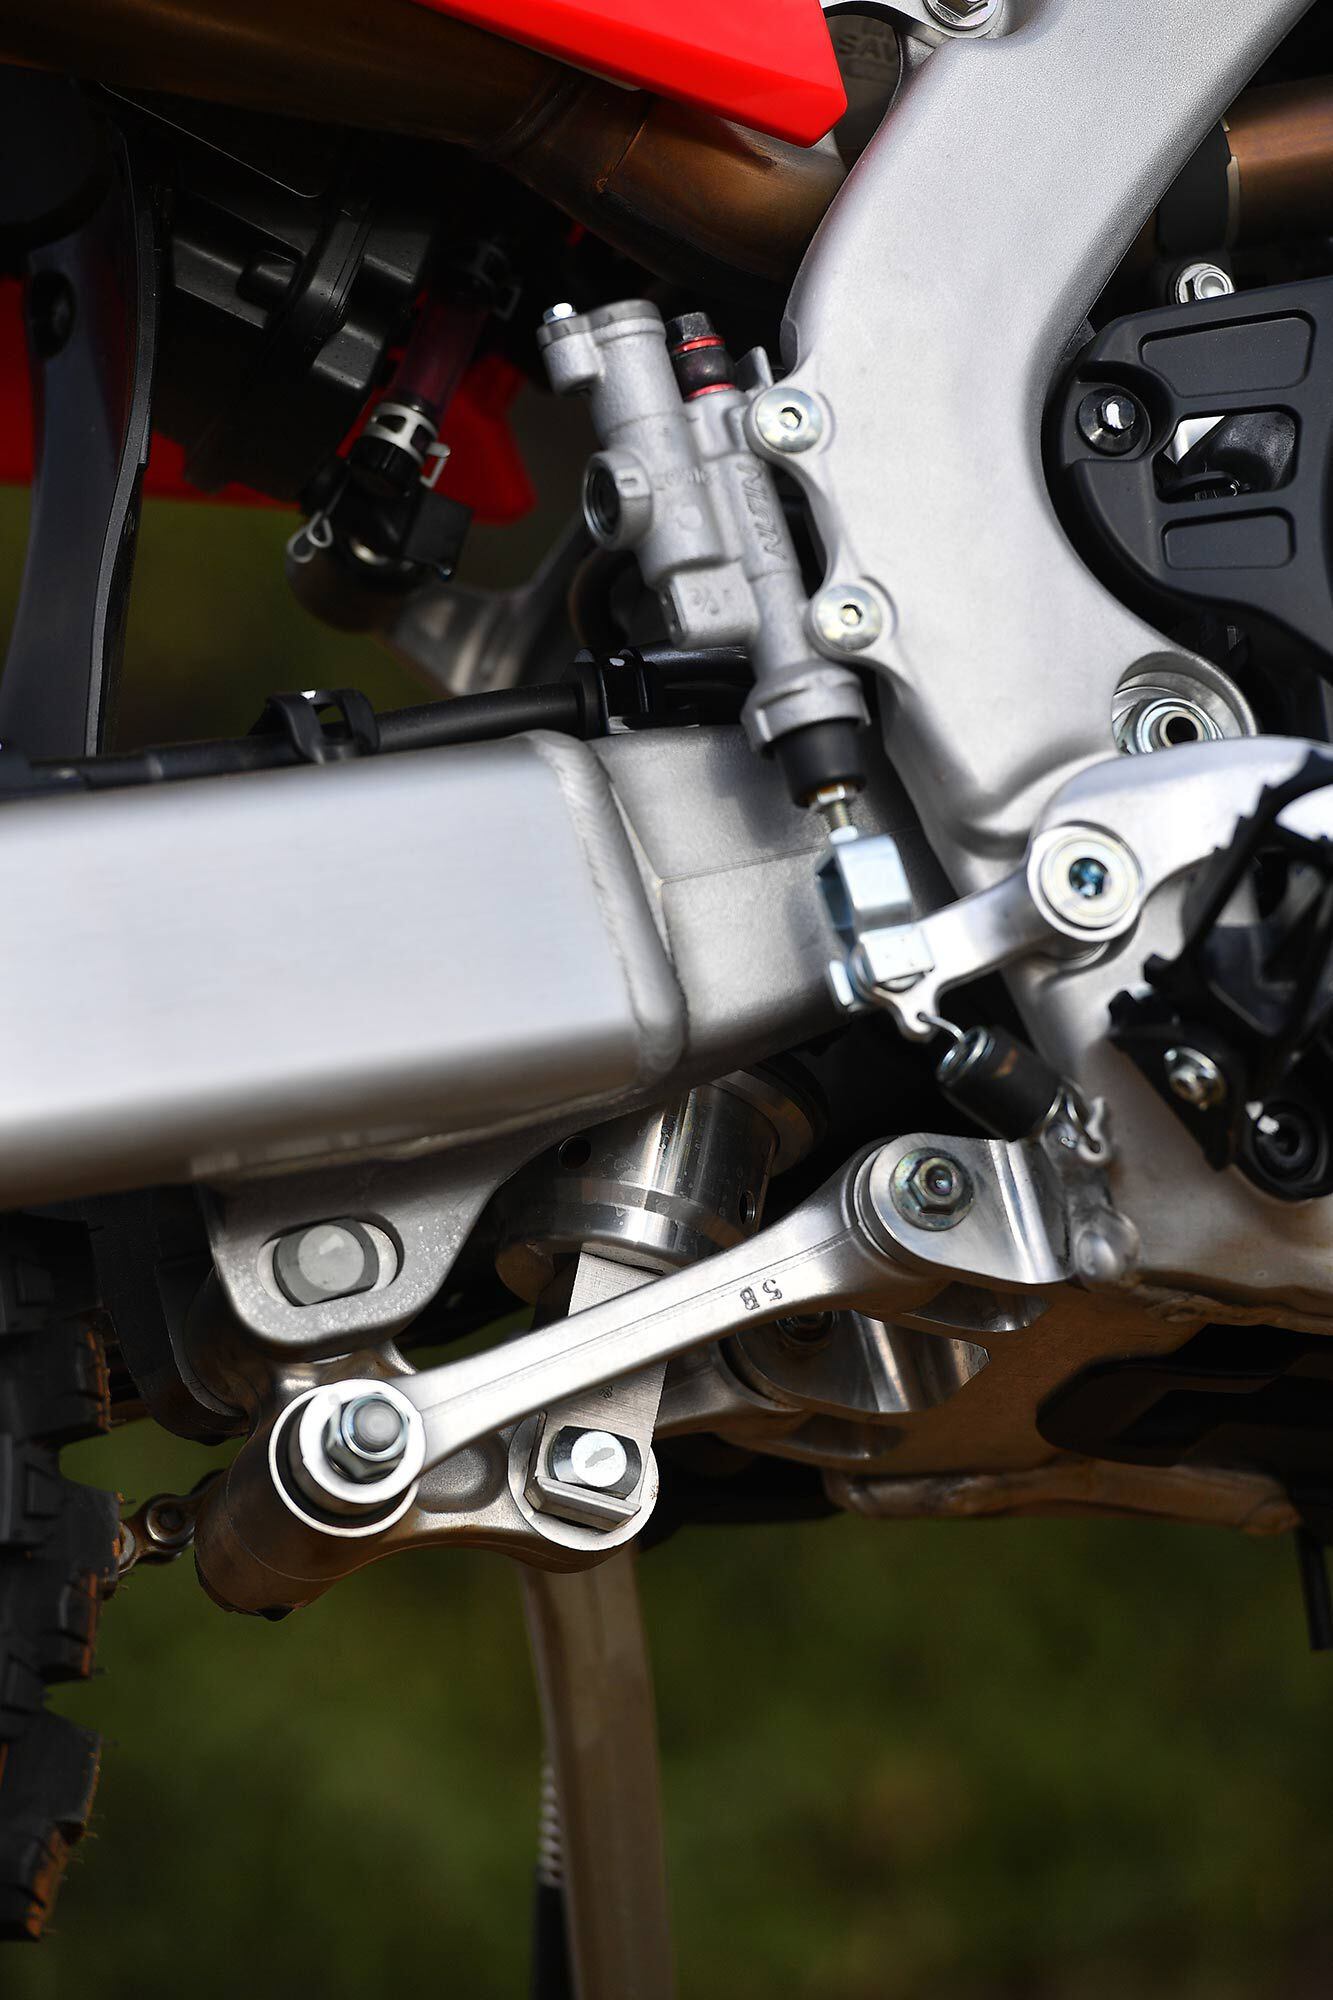 Lower right-side angle showing the linkage and rear brake master cylinder. Note the extended coverage of the black plastic clutch/case guard.